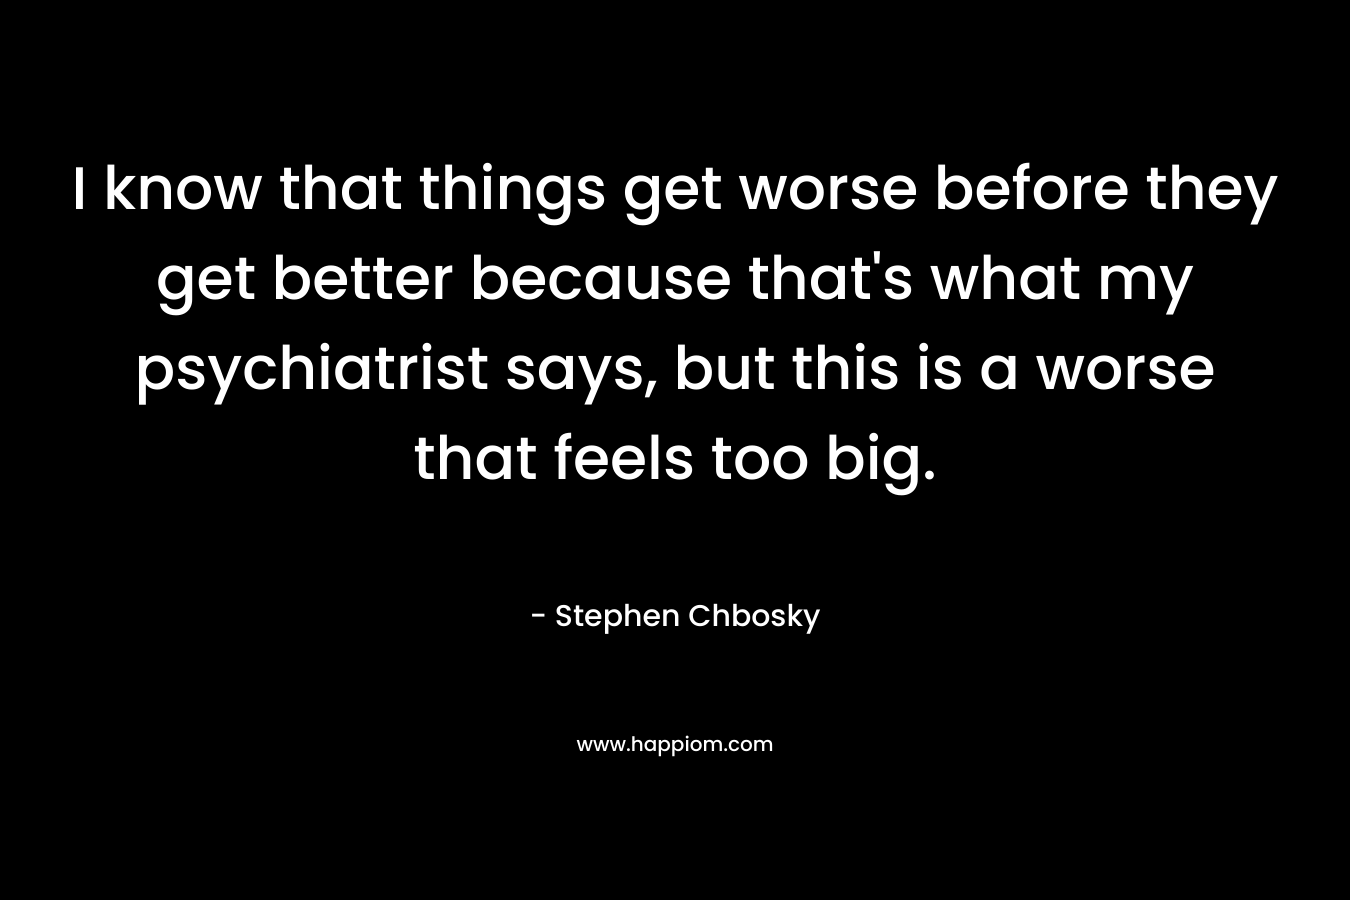 I know that things get worse before they get better because that’s what my psychiatrist says, but this is a worse that feels too big. – Stephen Chbosky